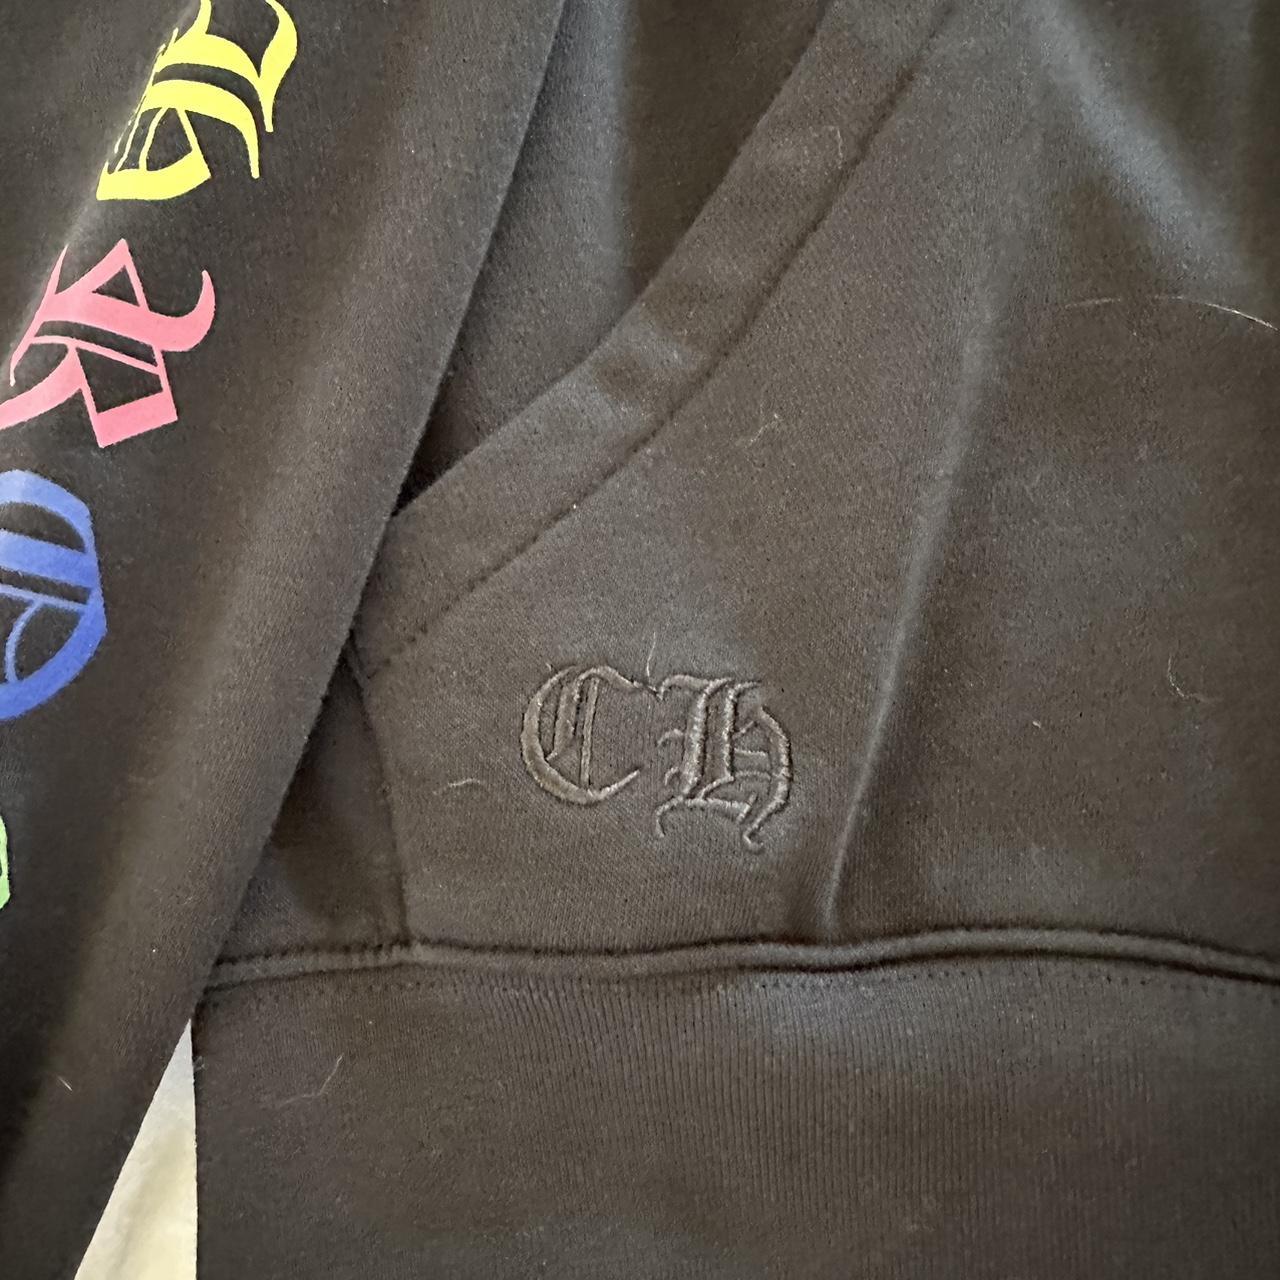 Chrome Hearts colorful cross hoodie Such a... - Depop